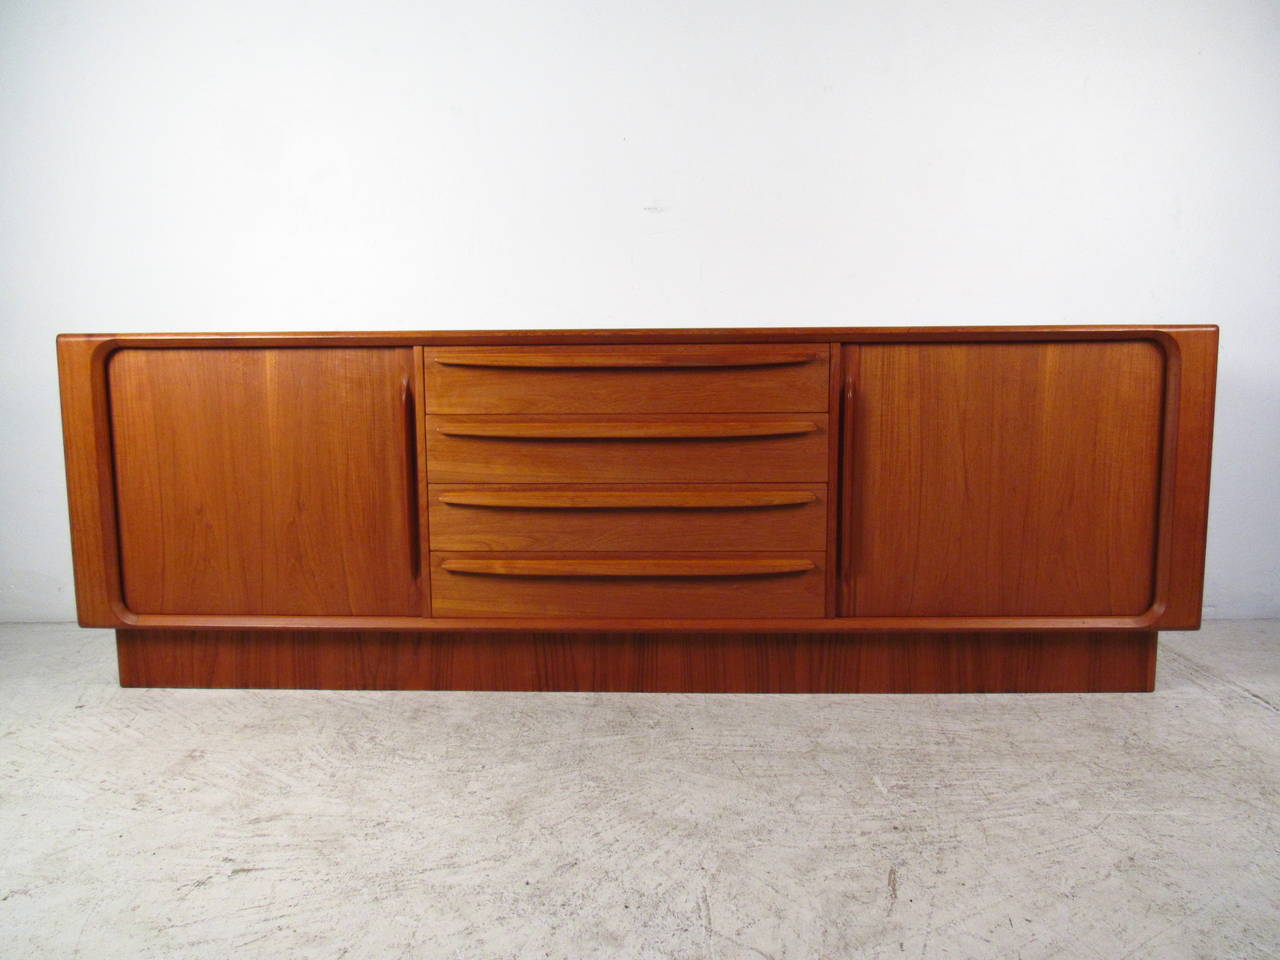 The beautiful teak finish on this unique sideboard makes the perfect mid-century addition to any interior. Plenty of storage options with seven drawers and added shelves make this a versatile piece for many situations. Manufactured by BPS of